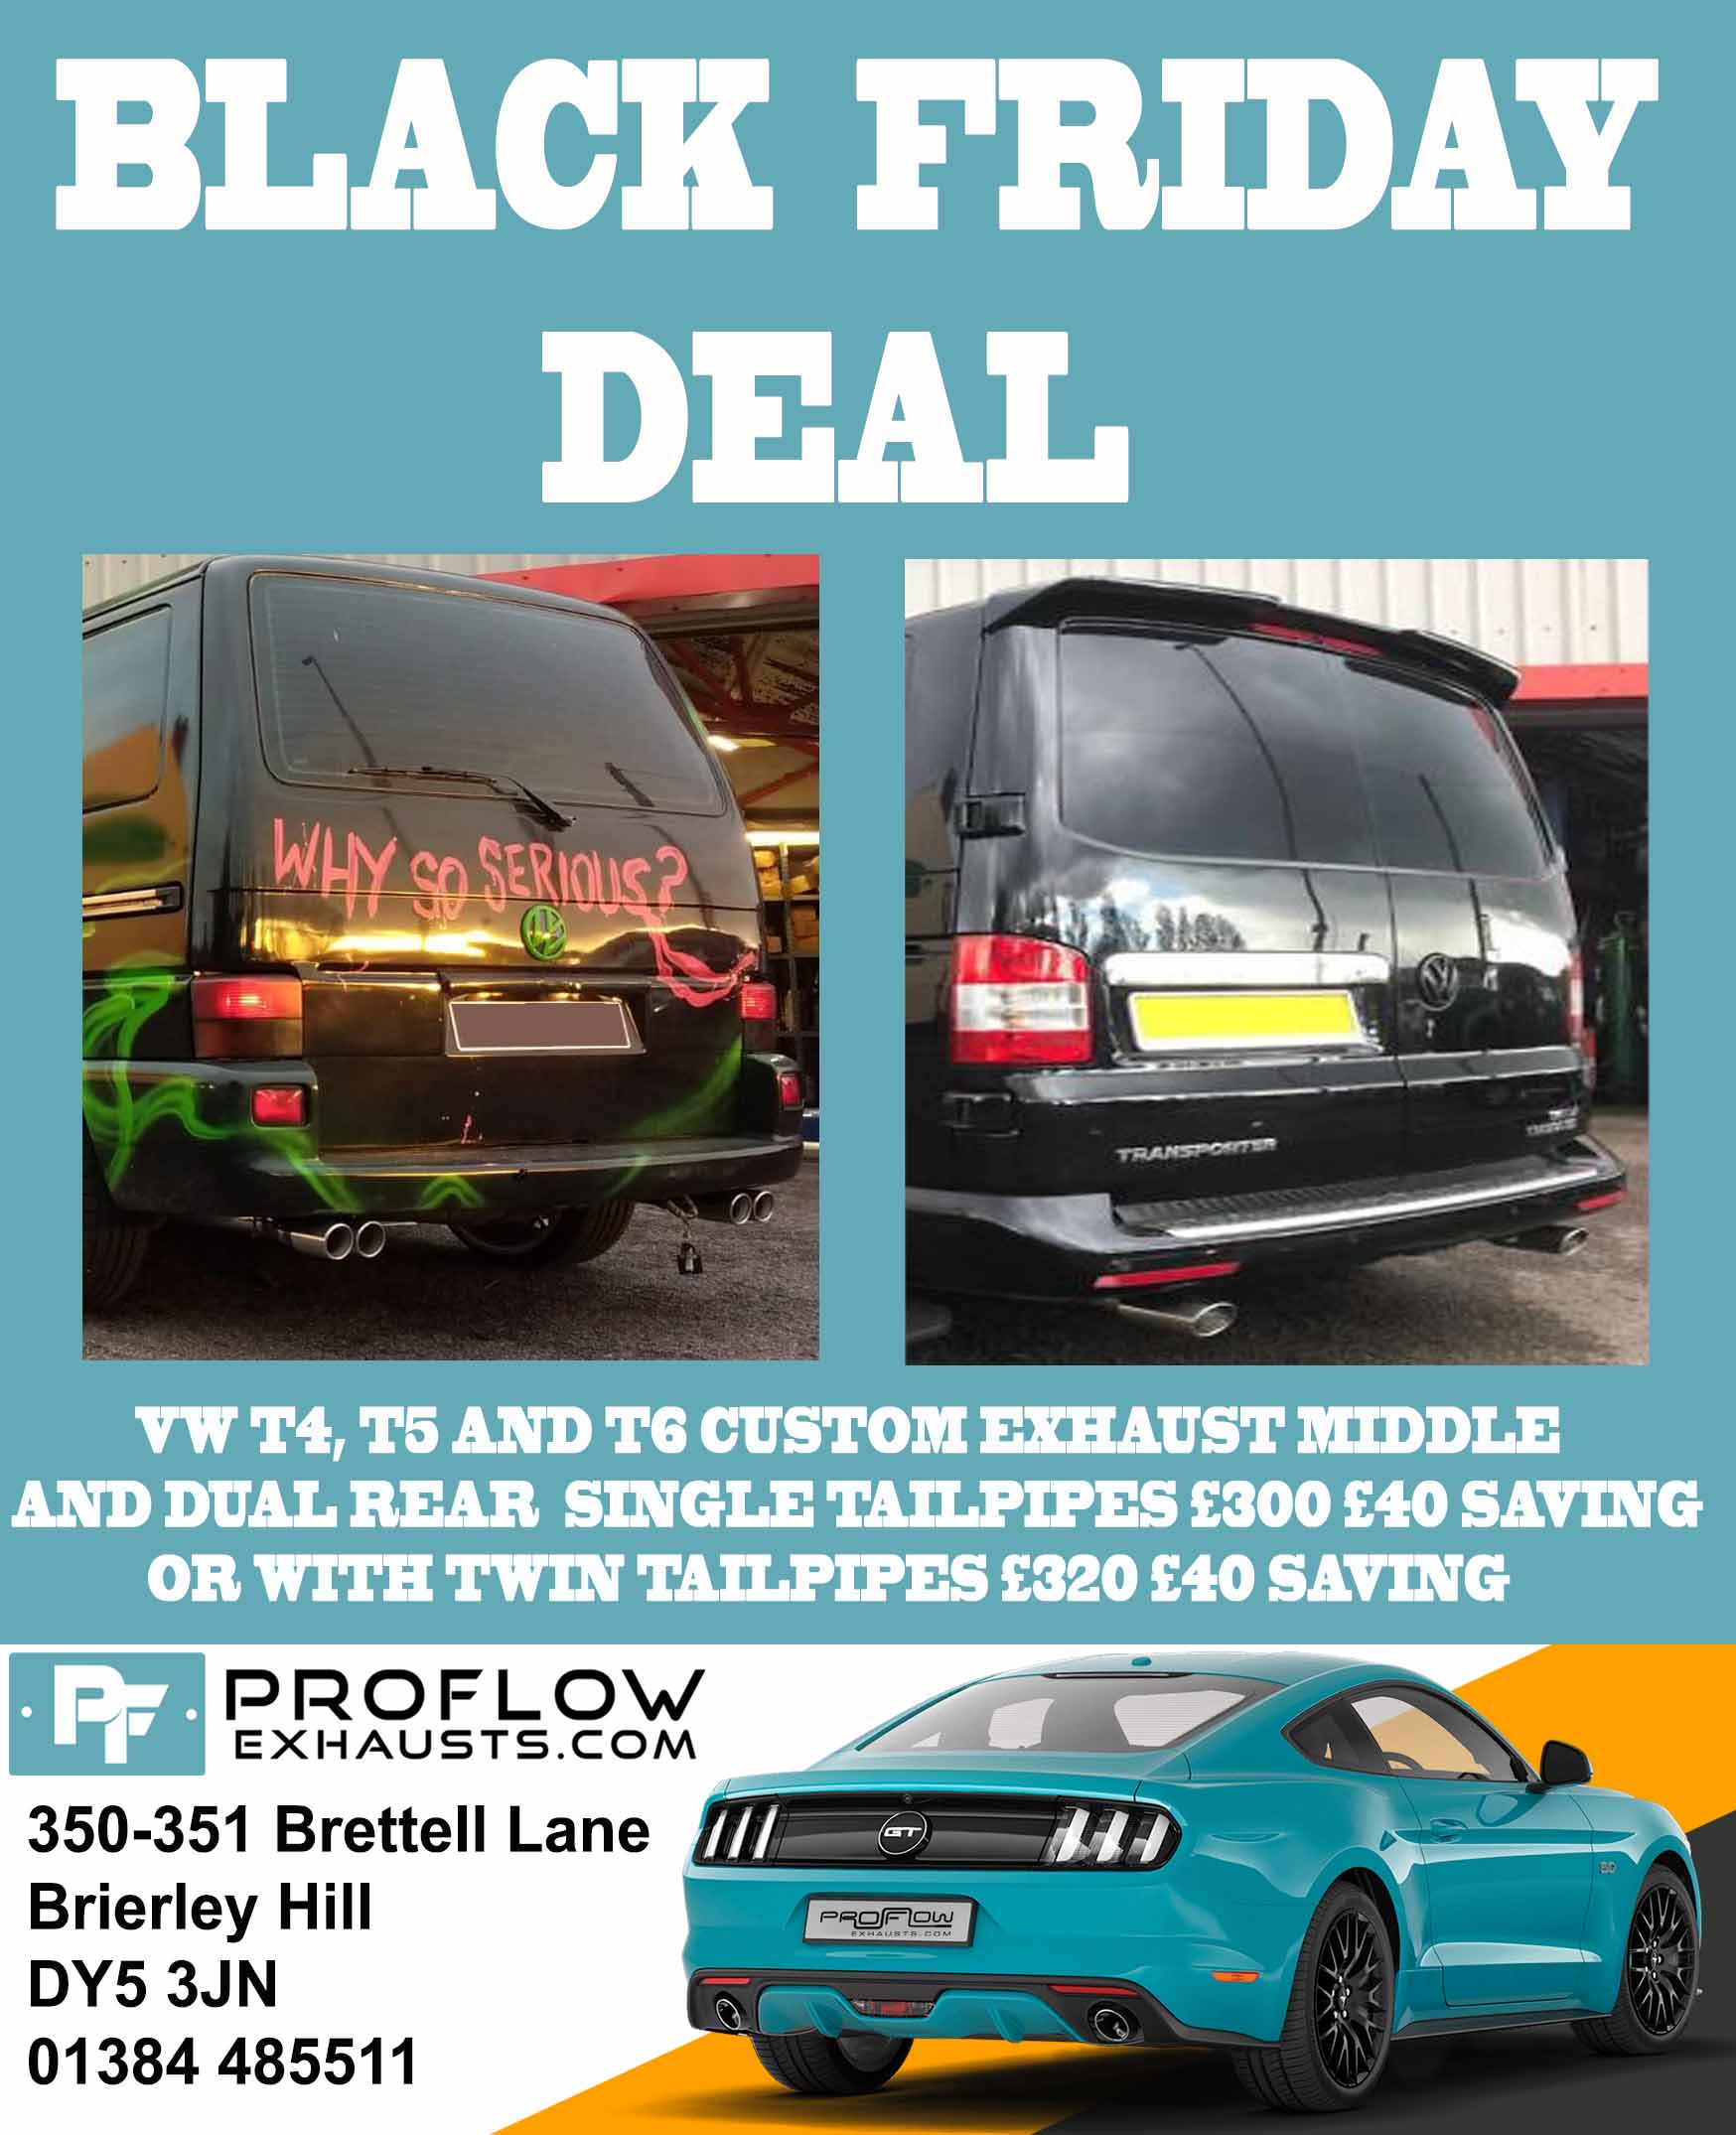 BLACK FRIDAY SALE VW Transporter T4, T5, T5.1 and T6 Custom Exhaust!